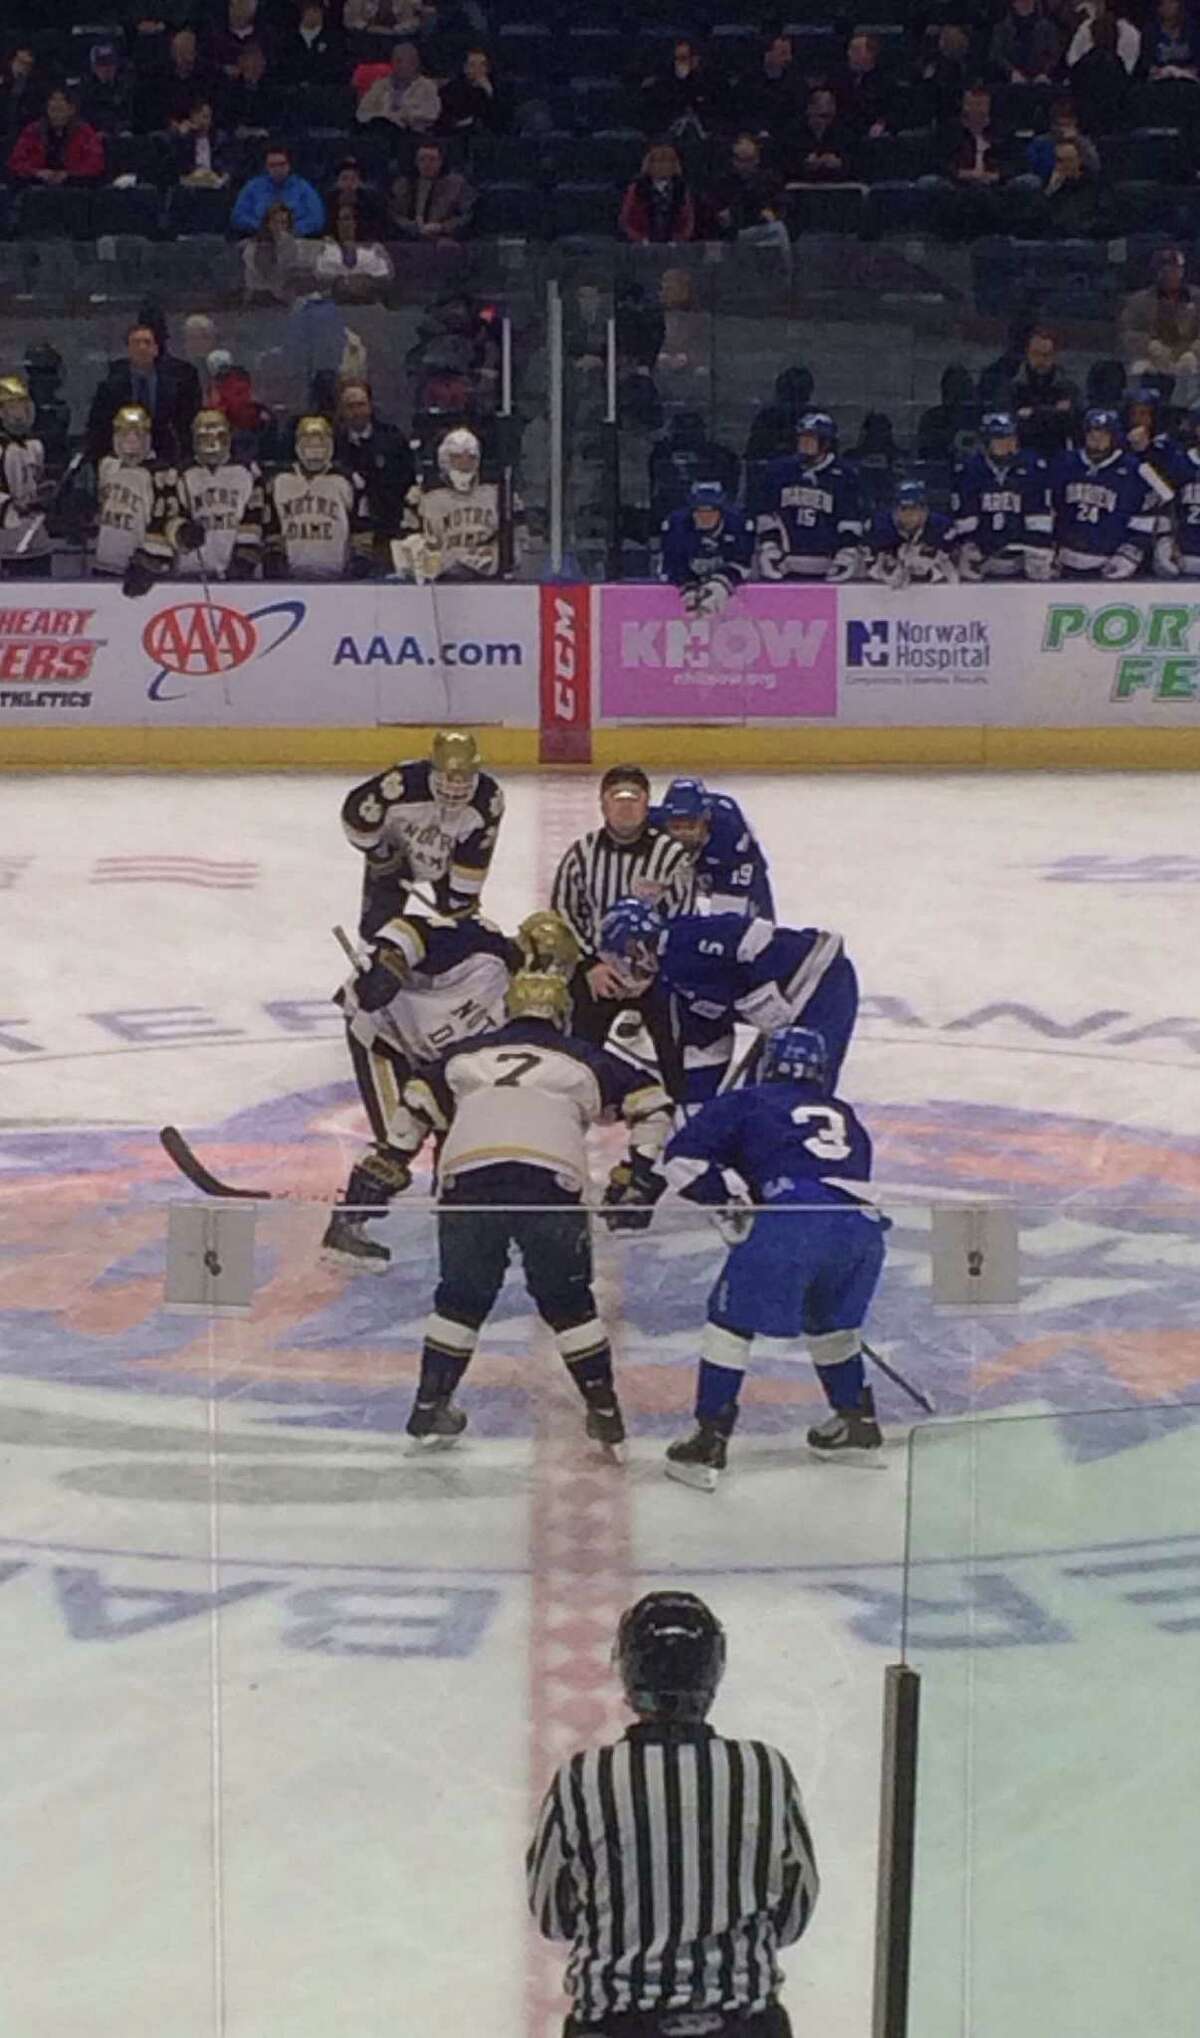 Darien boys hockey prepares to drop the puck against Notre-Dame Fairfield at Webster Bank Arena on Saturday, February 15.